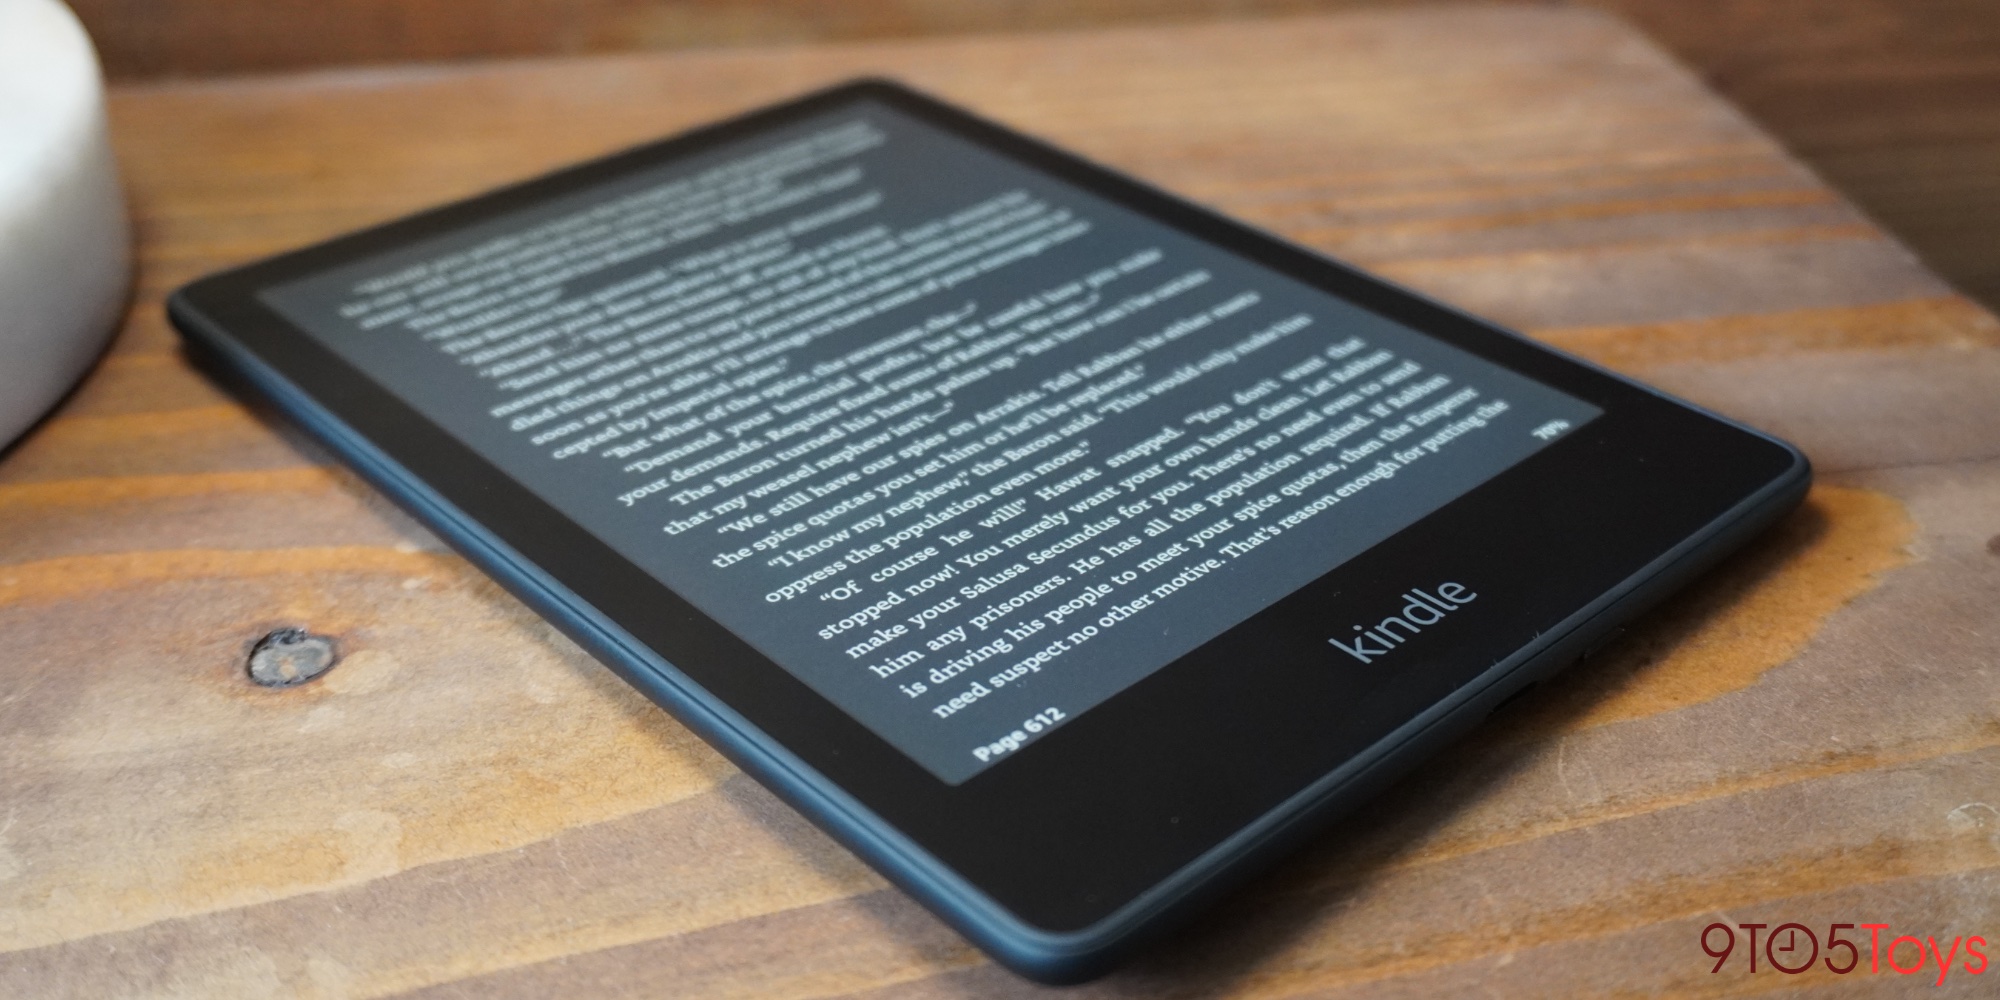 kindle for mac laptop